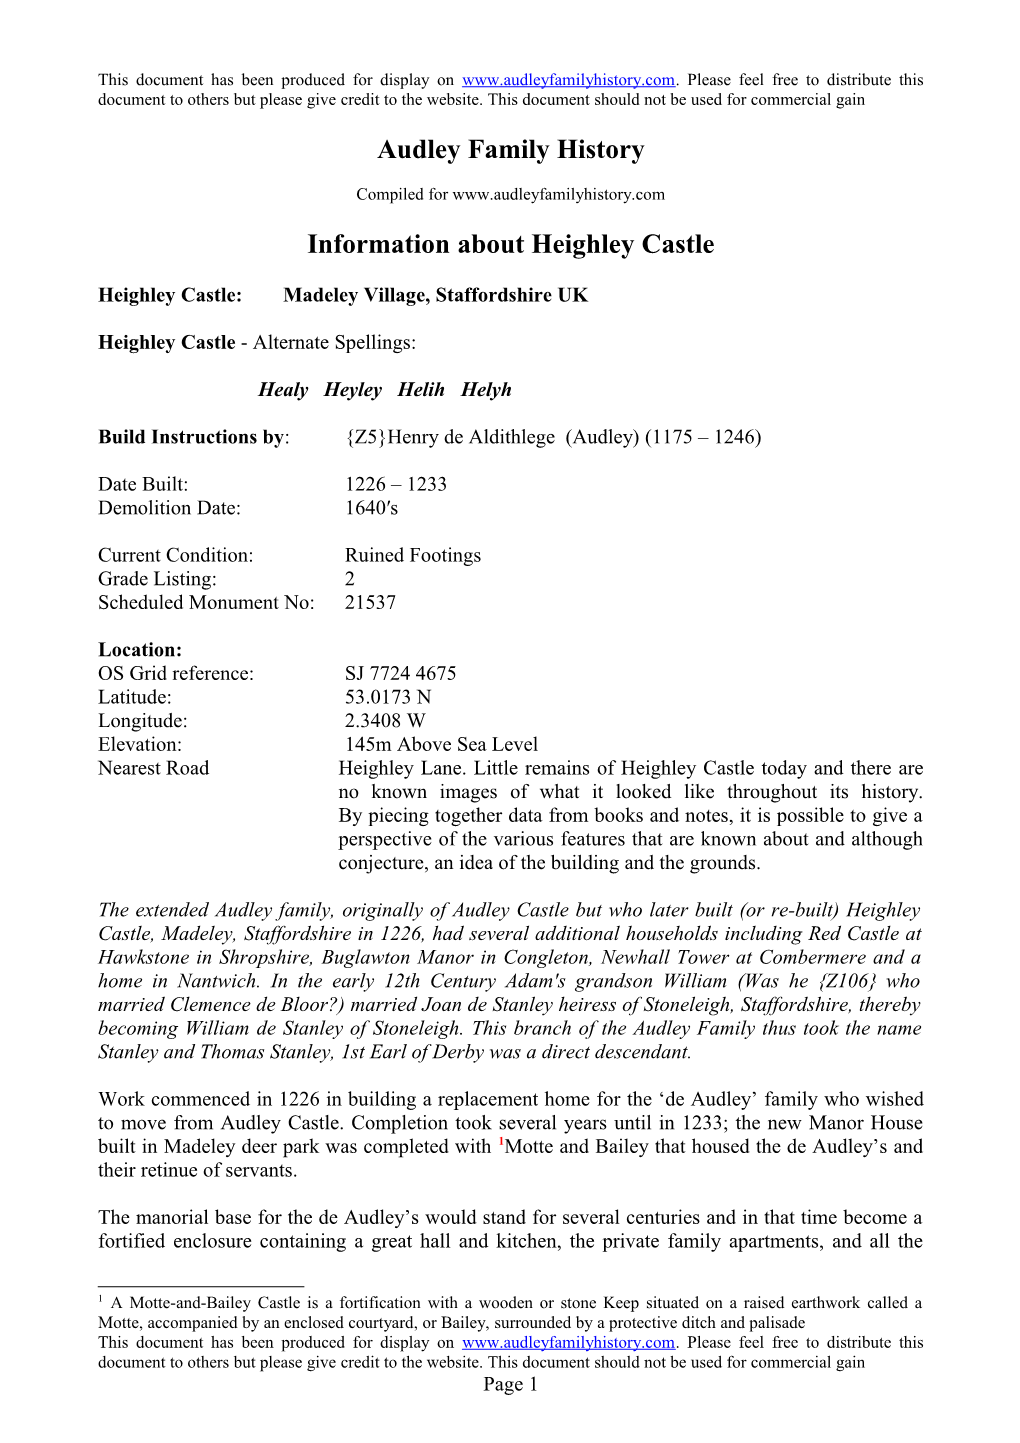 Information About Heighley Castle